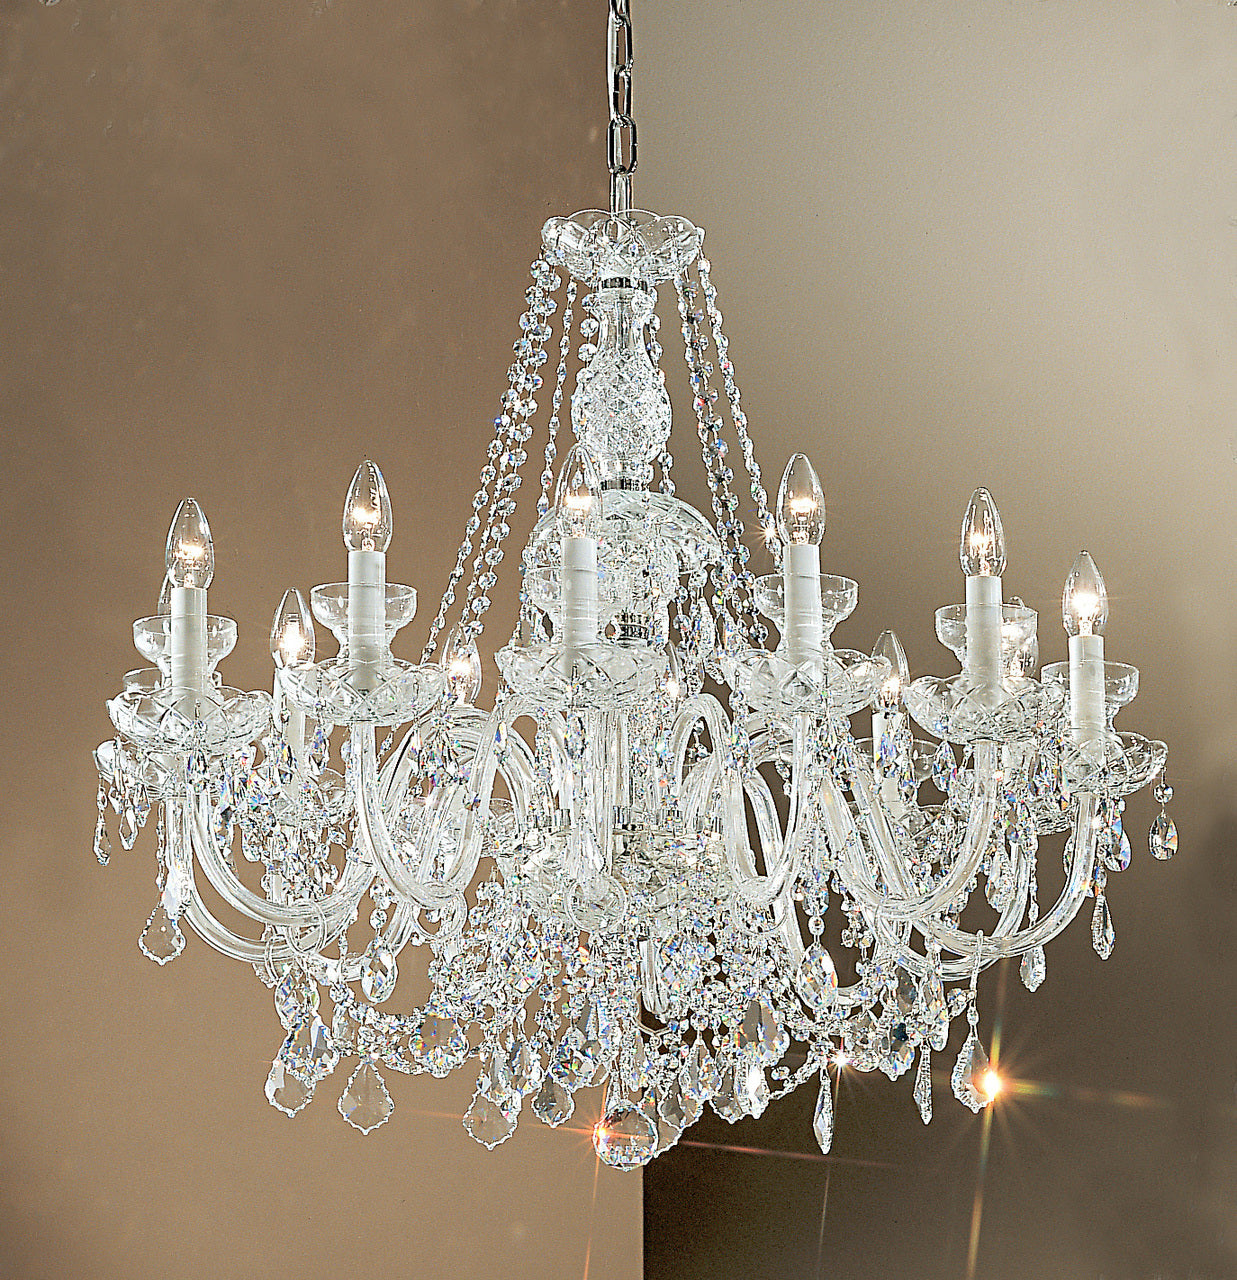 Classic Lighting 8274 CH S Bohemia Crystal/Glass Chandelier in Chrome (Imported from Italy)